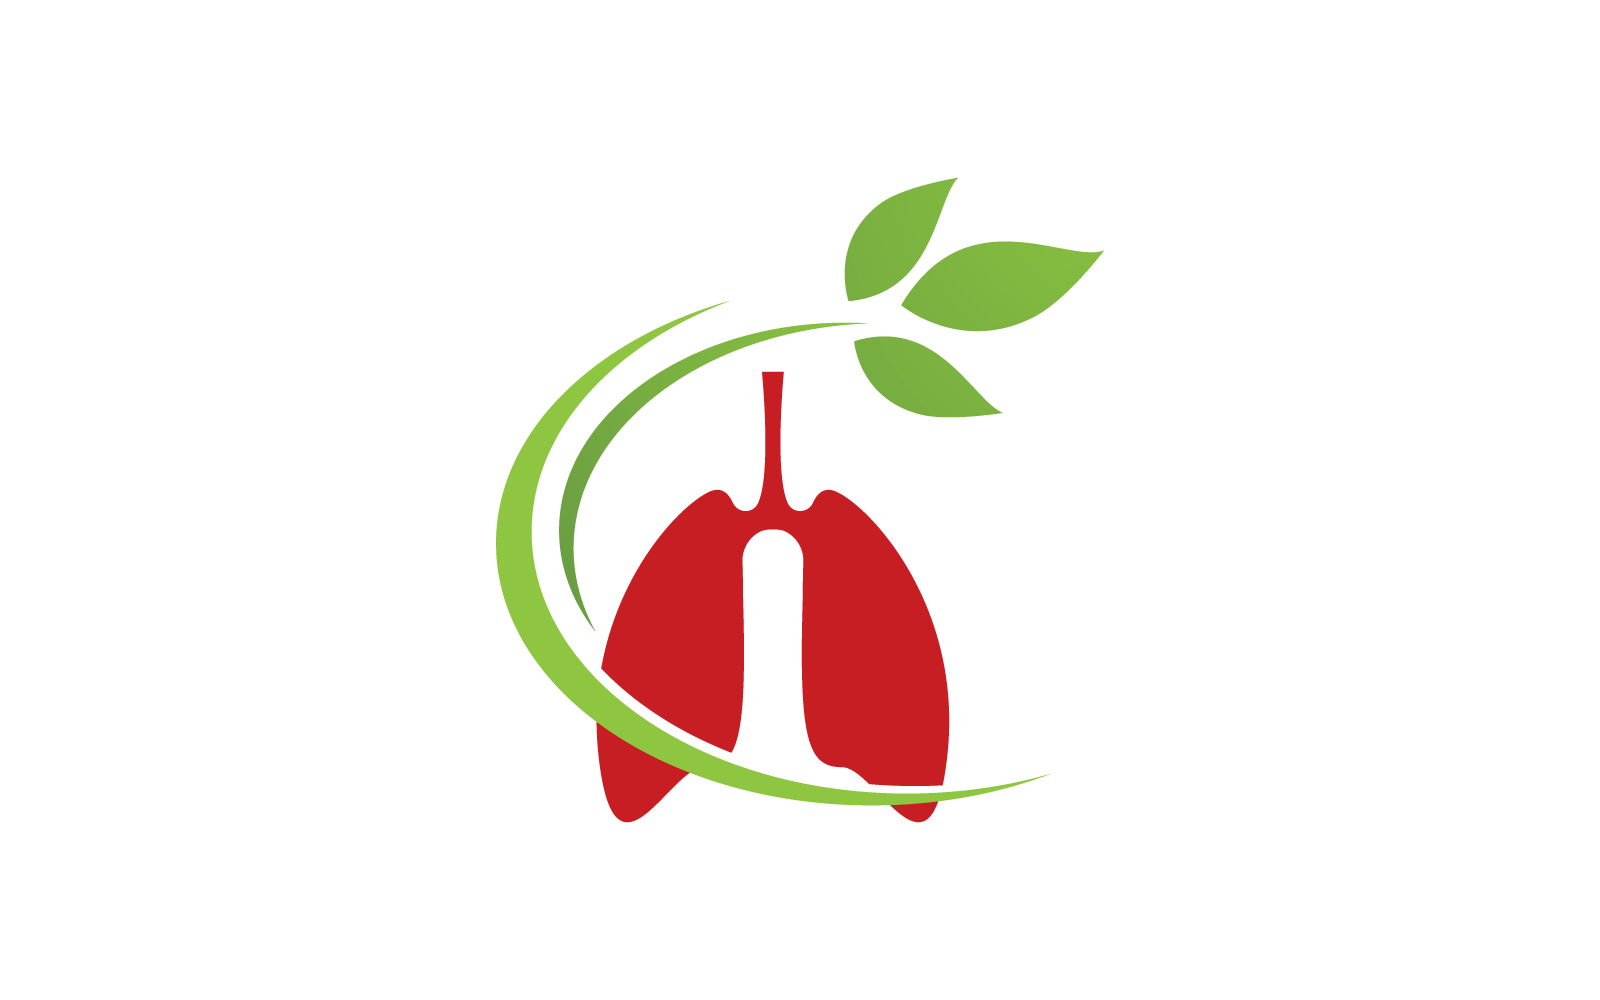 Lungs illustration vector template flat design template